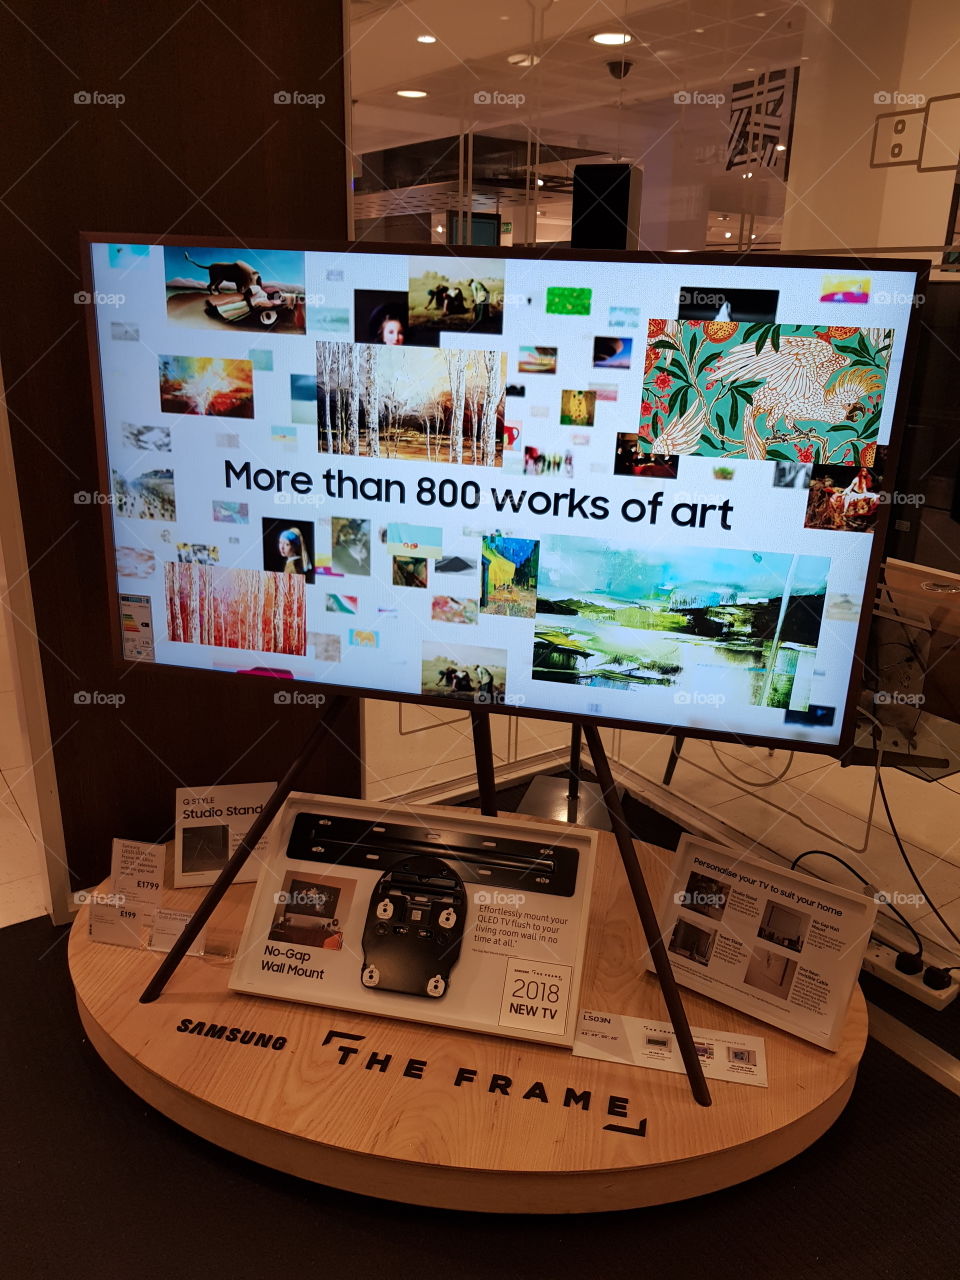 Samsung The Frame TV with more than 800 works of art display at Peter Jones Sloane square Chelsea King's road